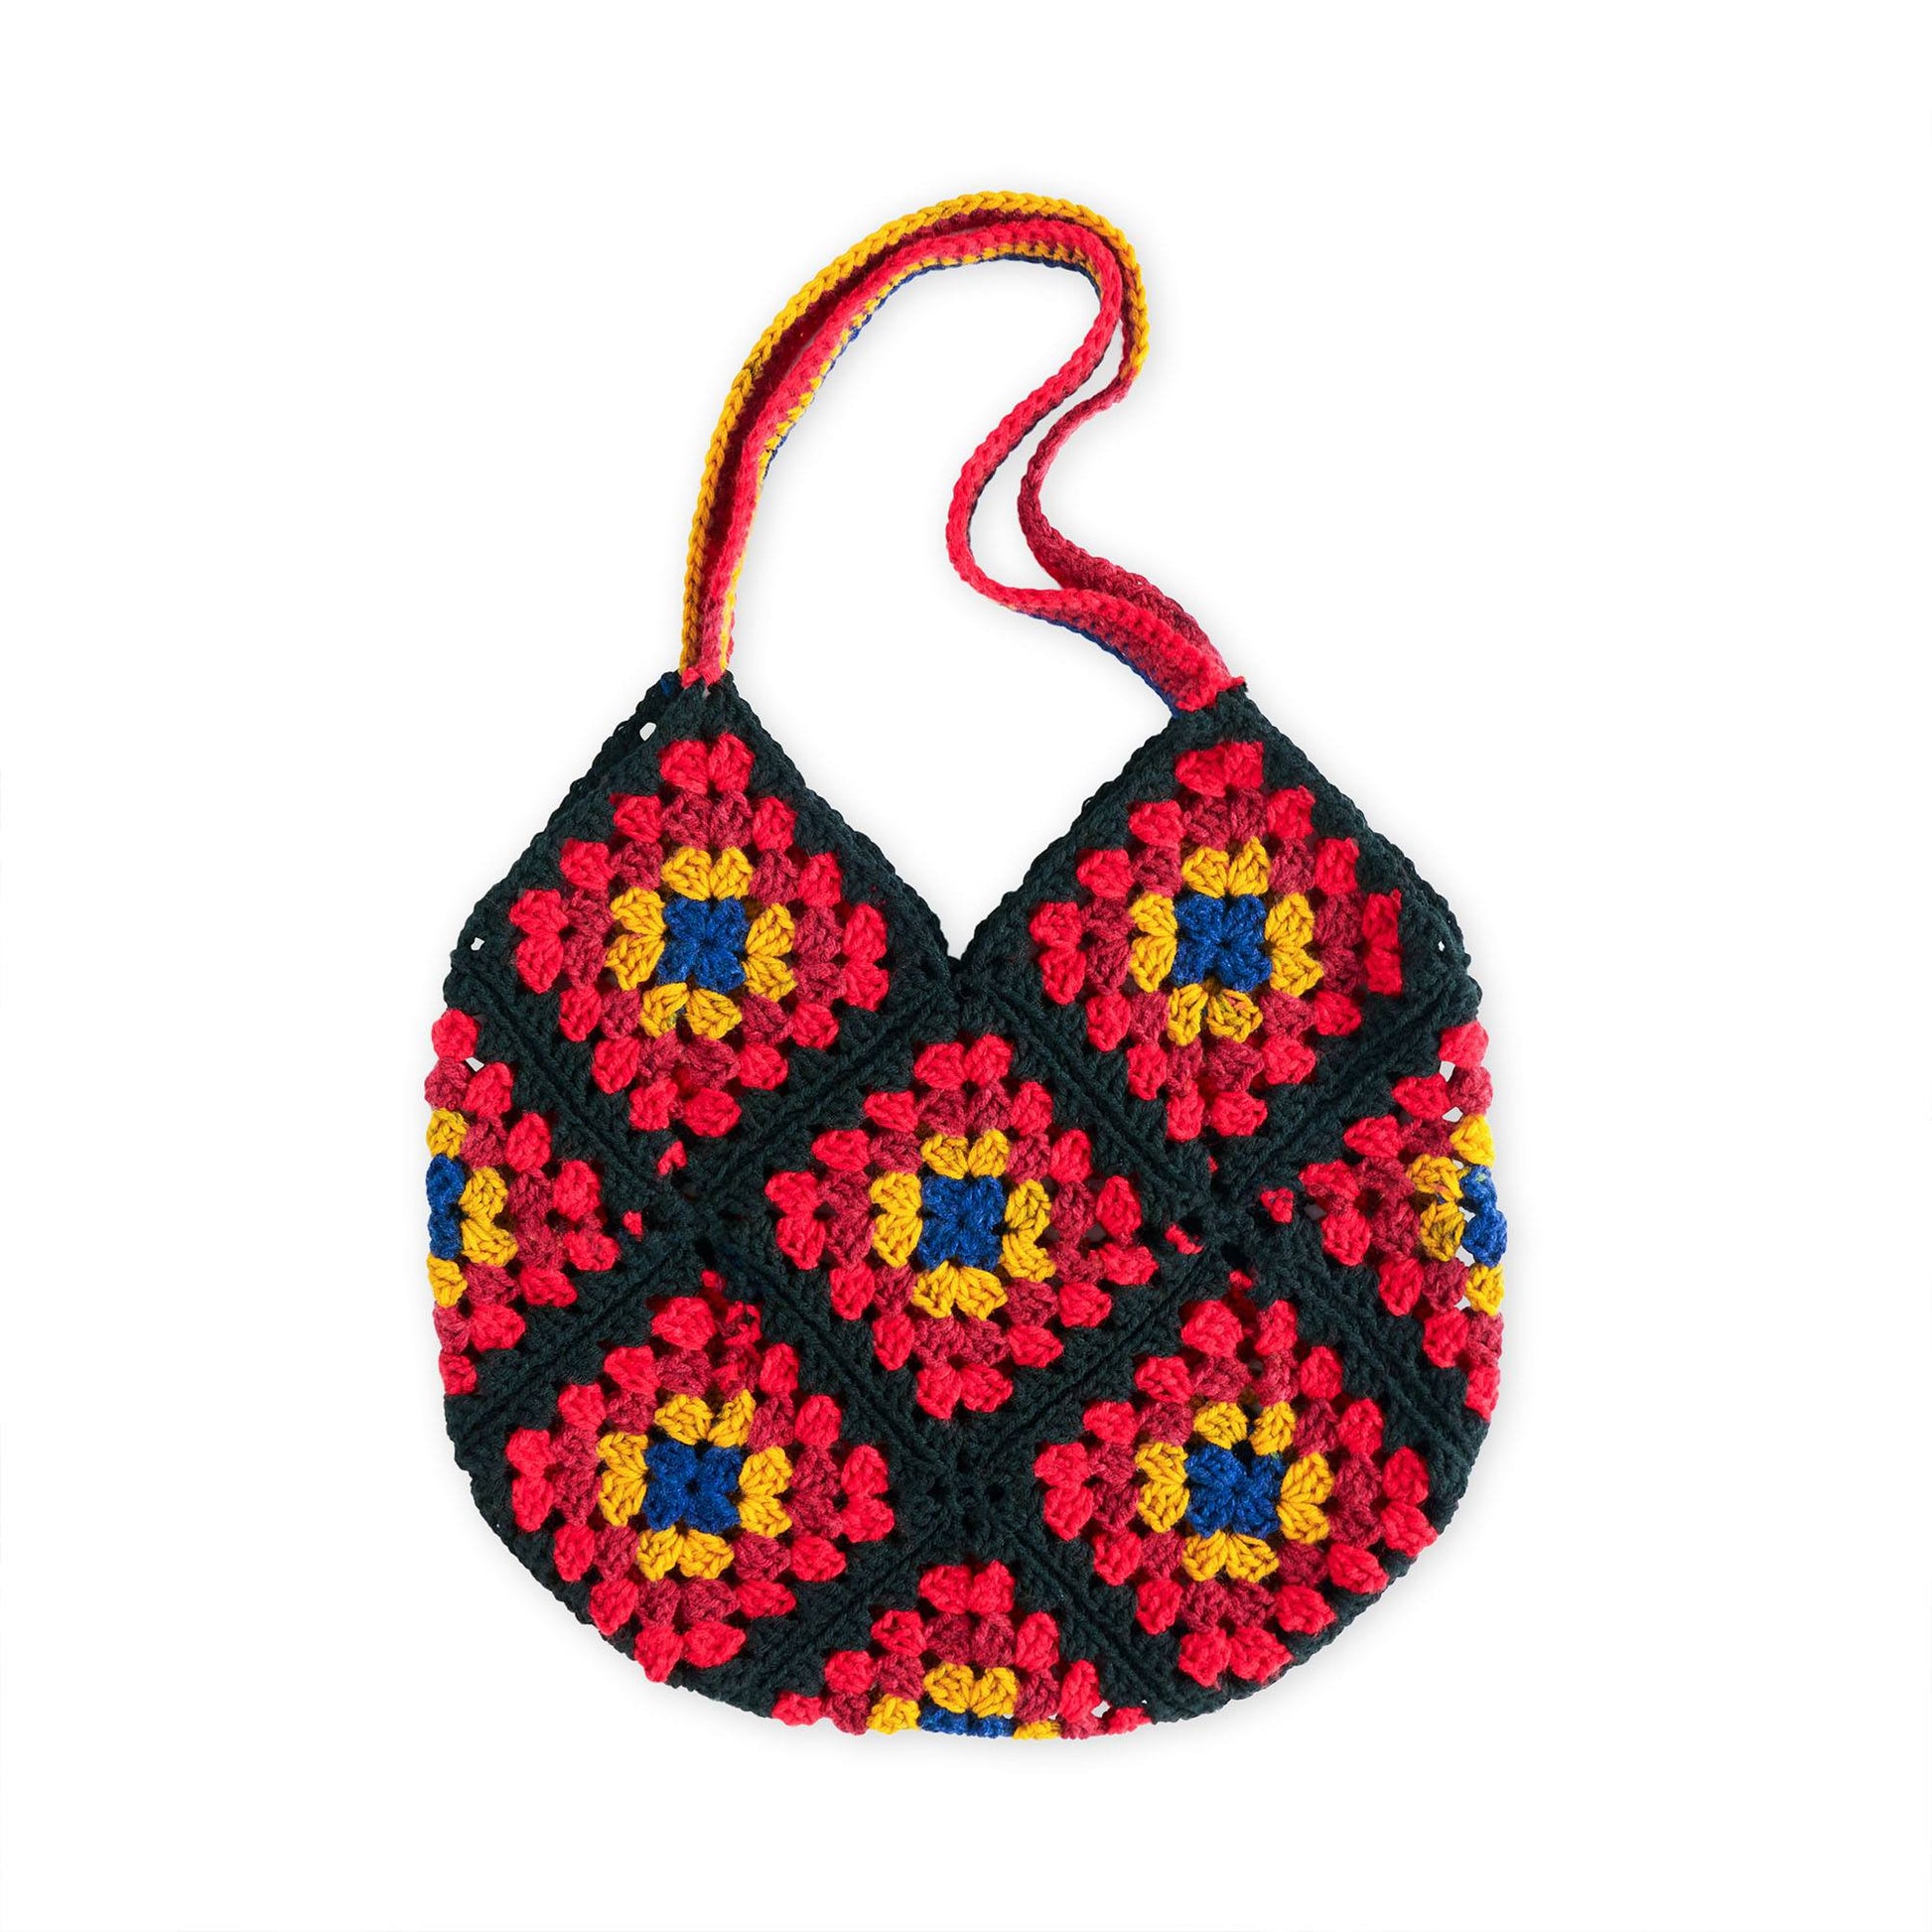 Red Heart Granny Squares Galore Crochet Bag Pattern Pattern